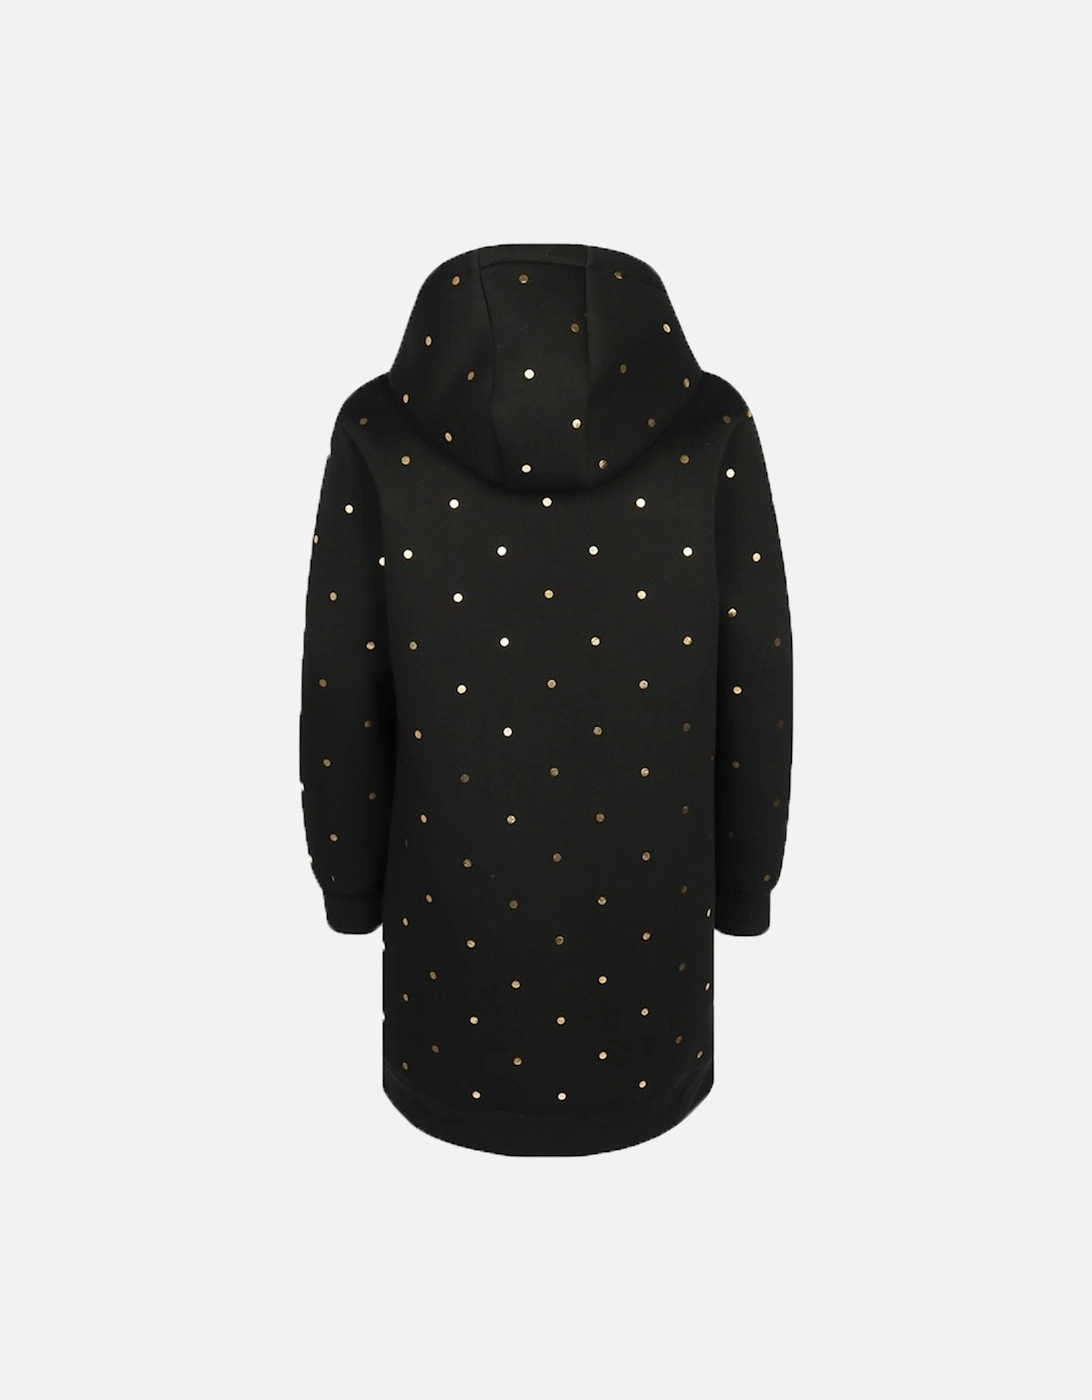 Girls Hooded Dress With Gold Polka Dots Black